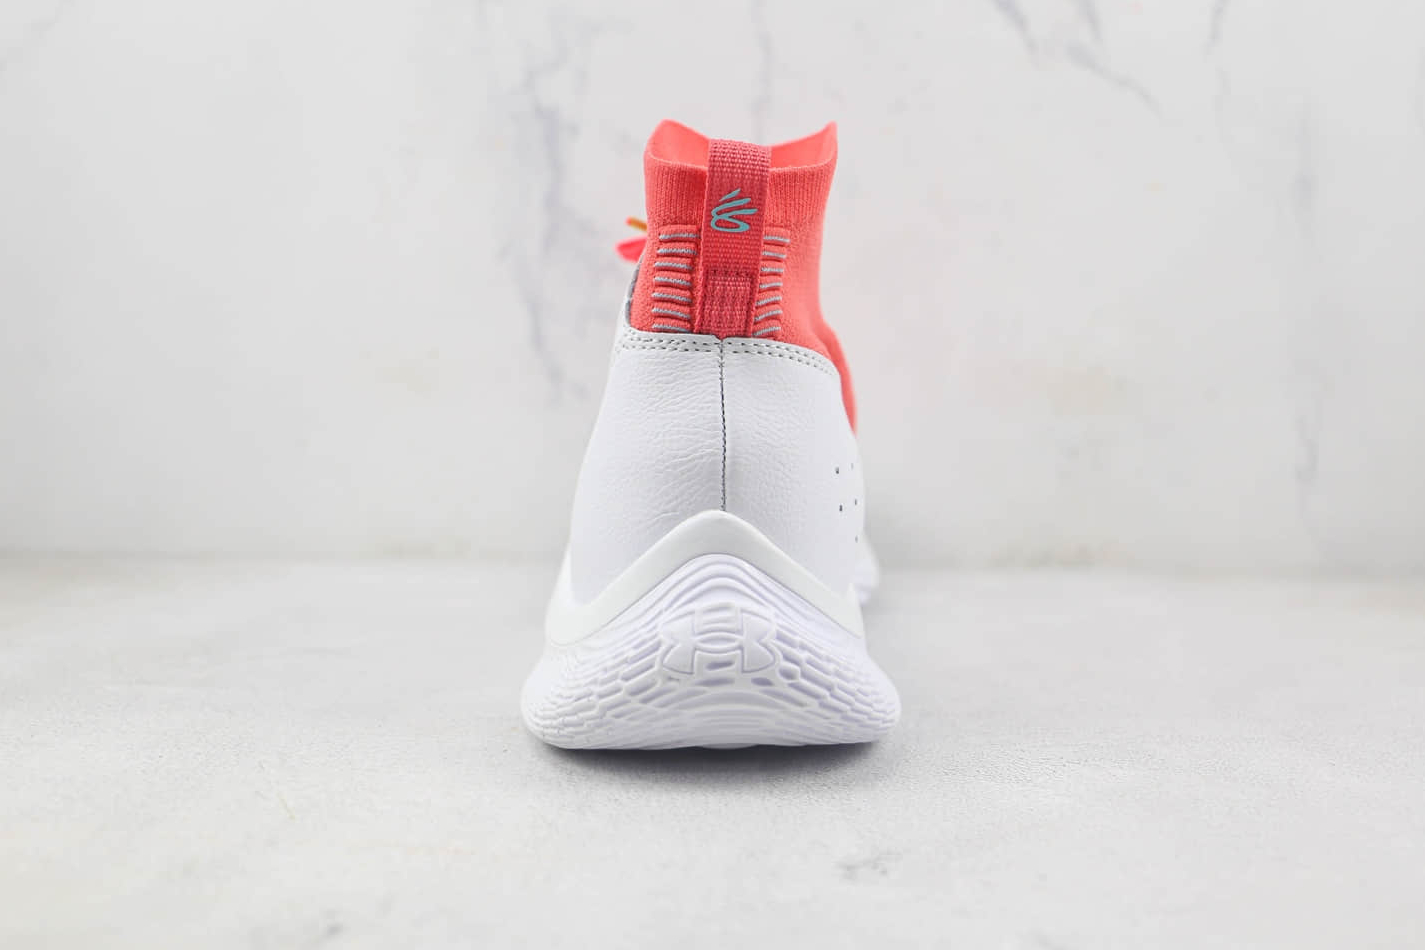 Under Armour Curry 4 FloTro 'White Red' | 3024861-100 - Top Performance Basketball Sneakers